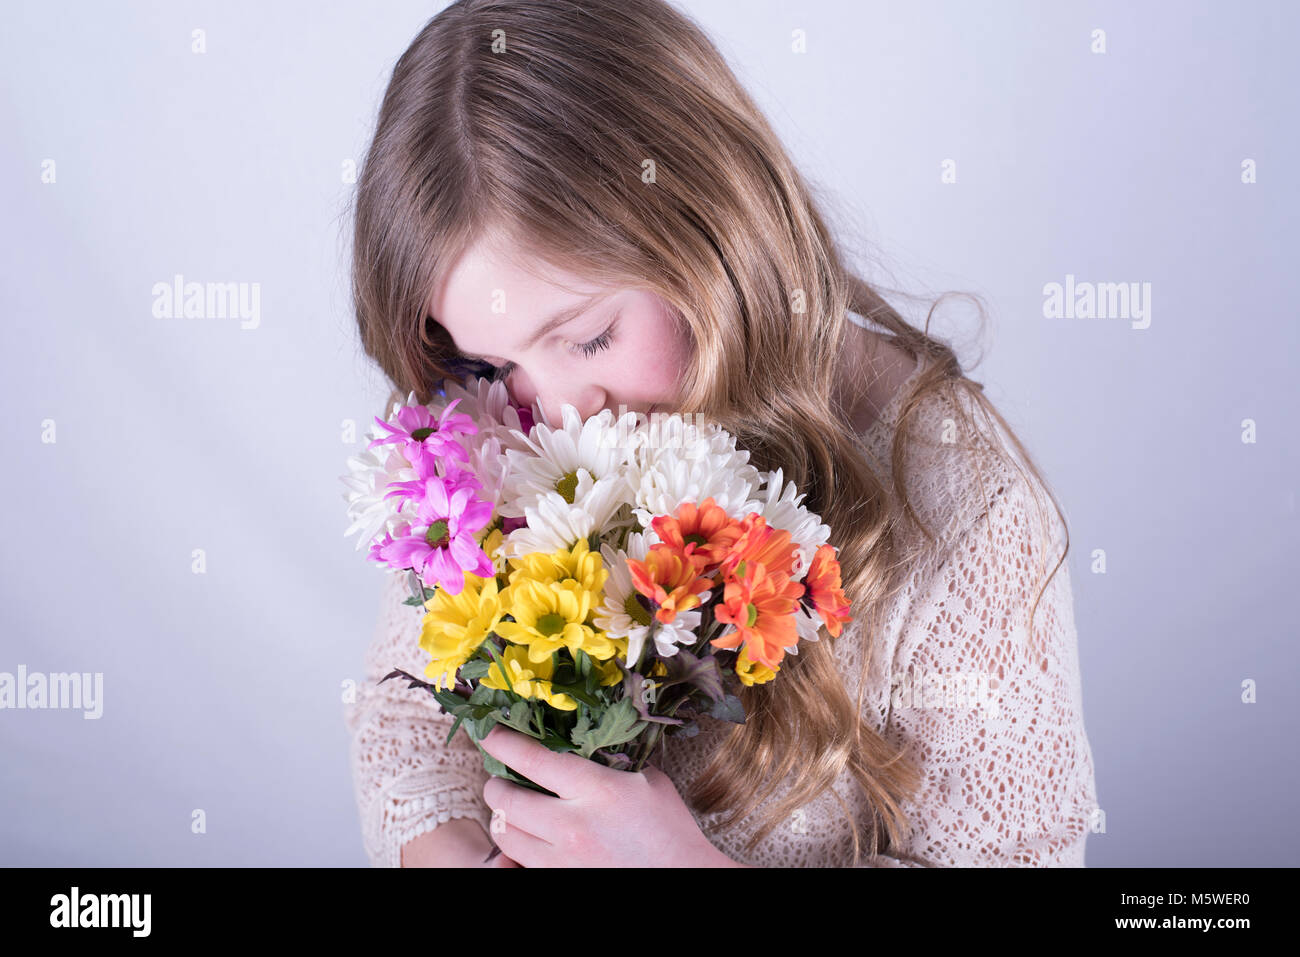 Smiling twelve-year-old girl with long, dirty blonde hair holding colorful bouquet of daisies and smelling with eyes closed against white background Stock Photo